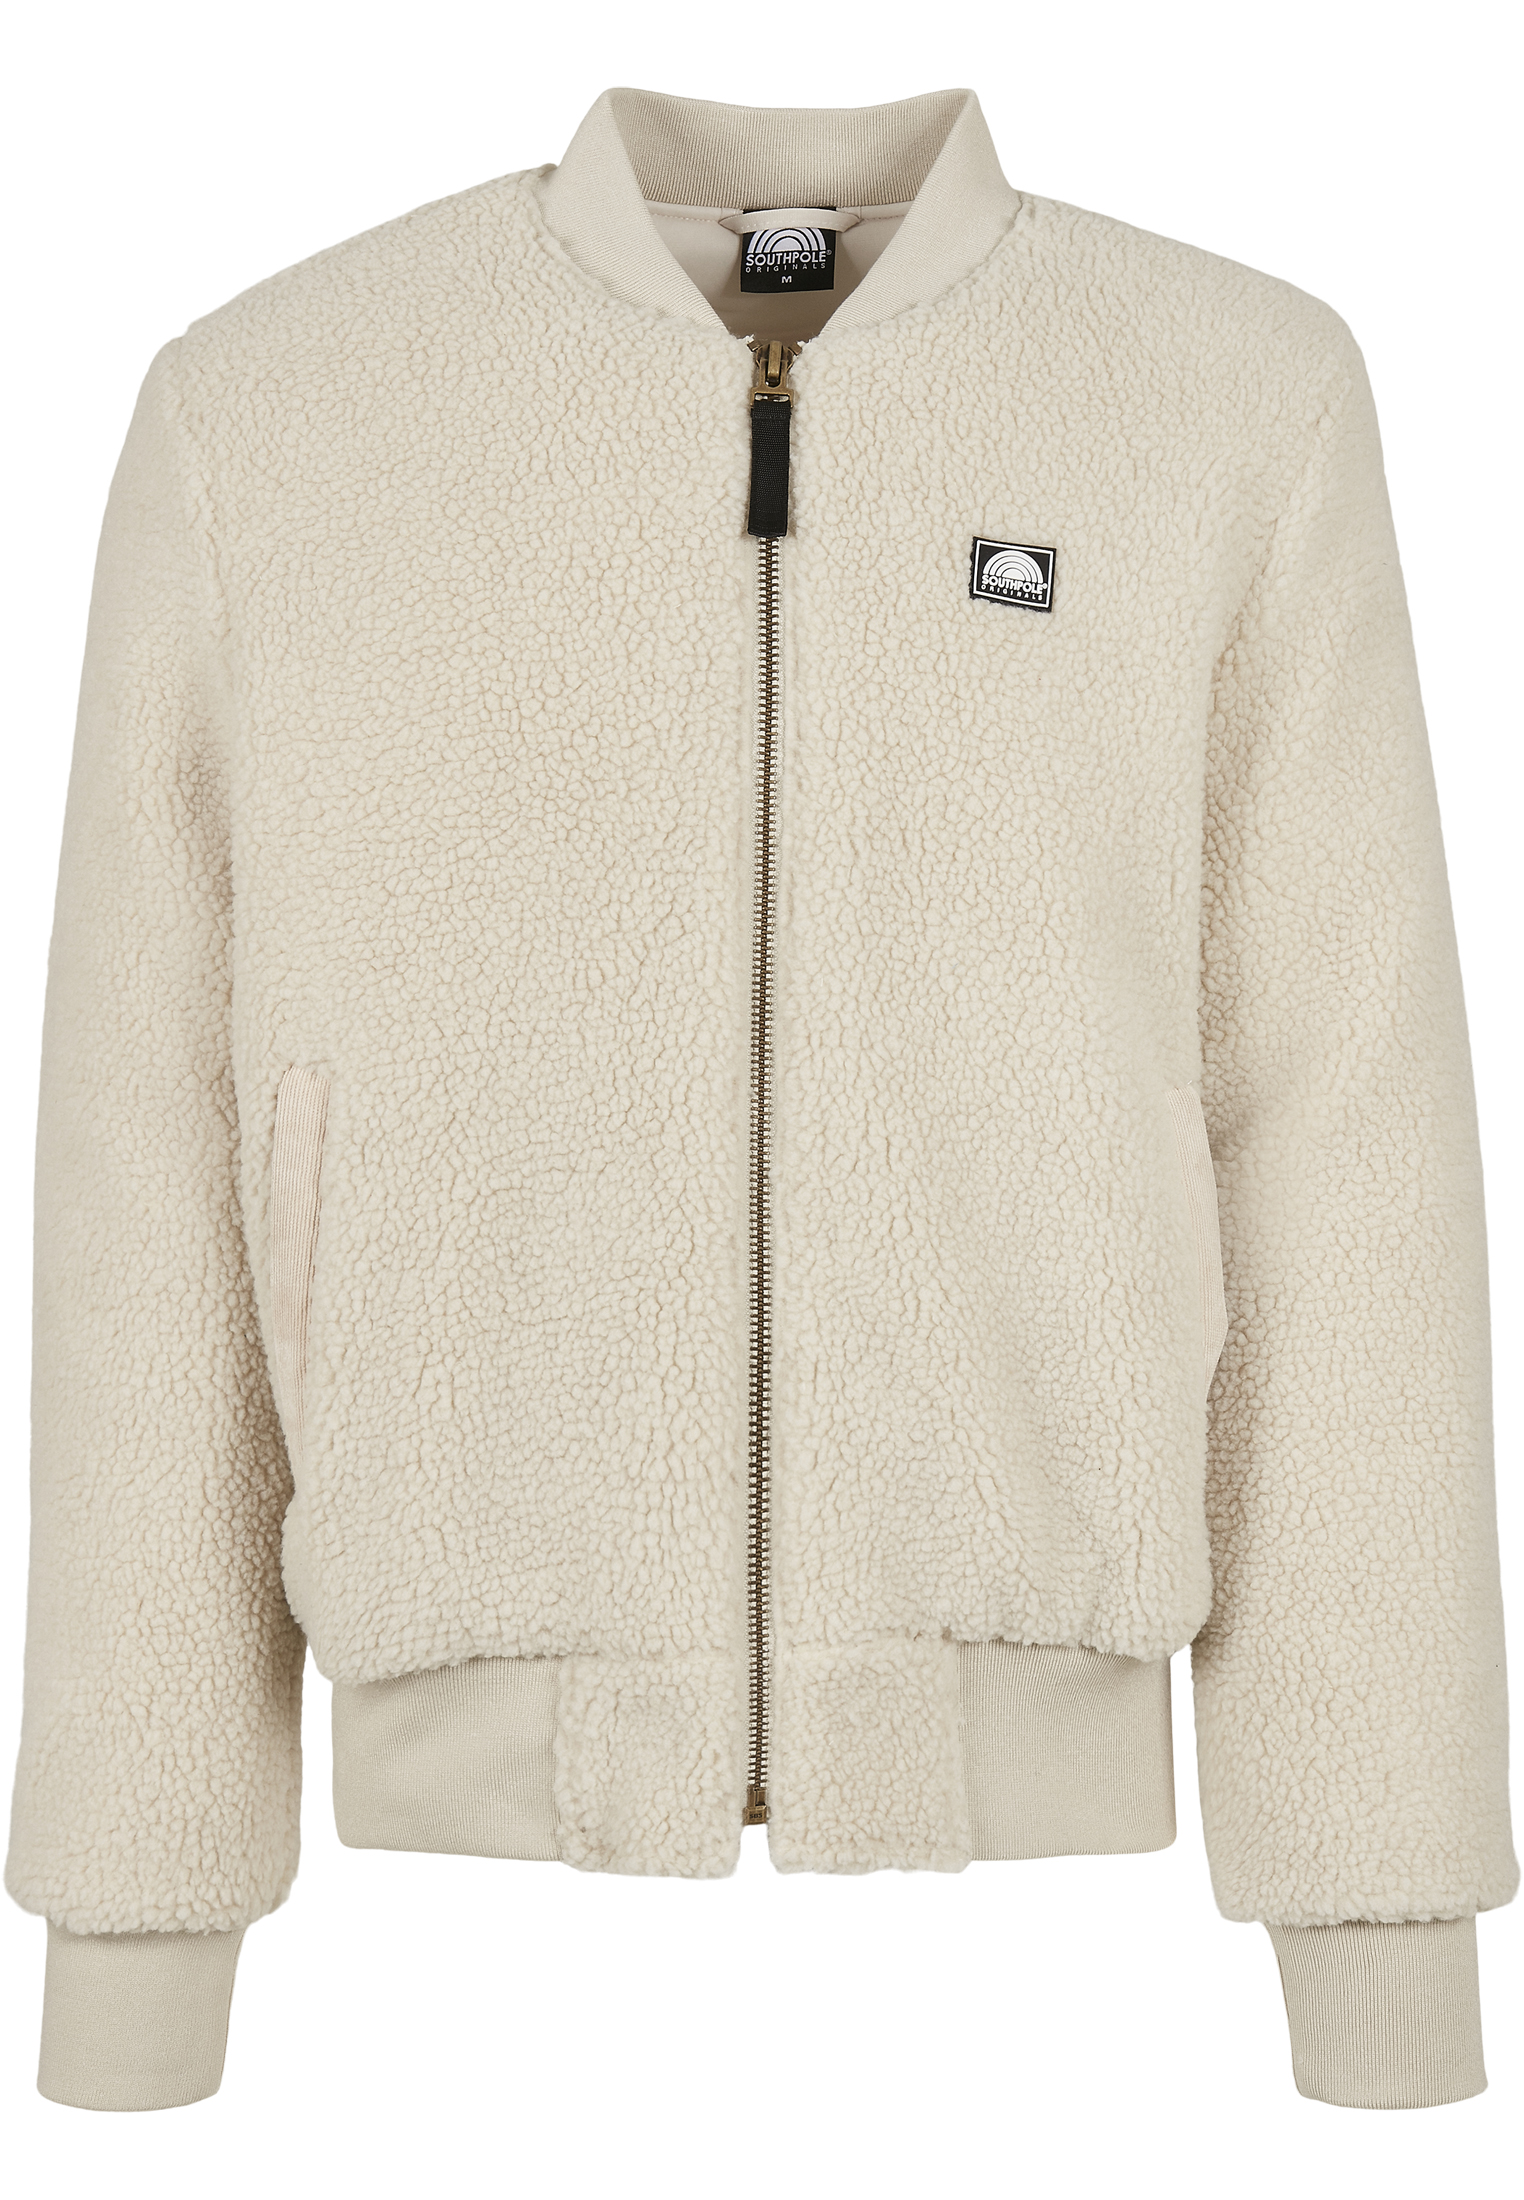 Saisonware Southpole Sherpa Bomber Jacket in Farbe sand